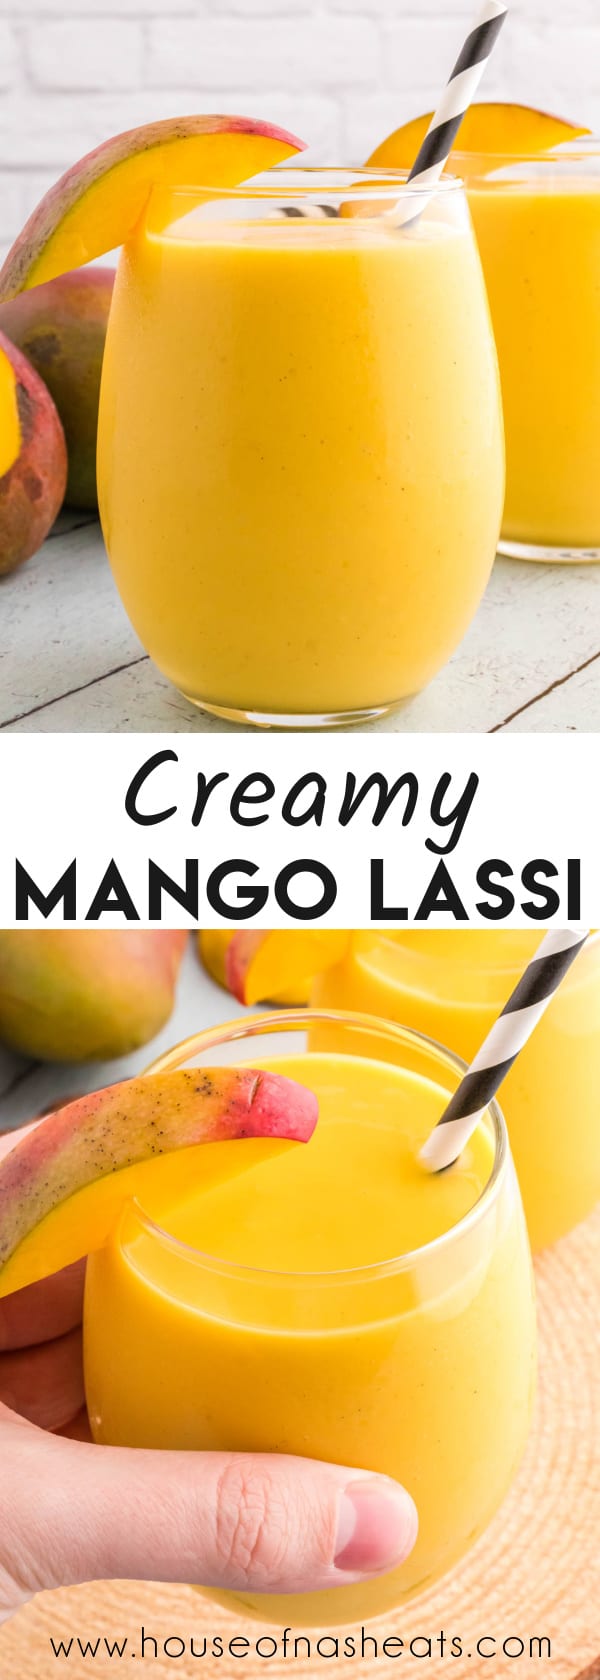 A collage of images of mango lassi drink with text overlay.